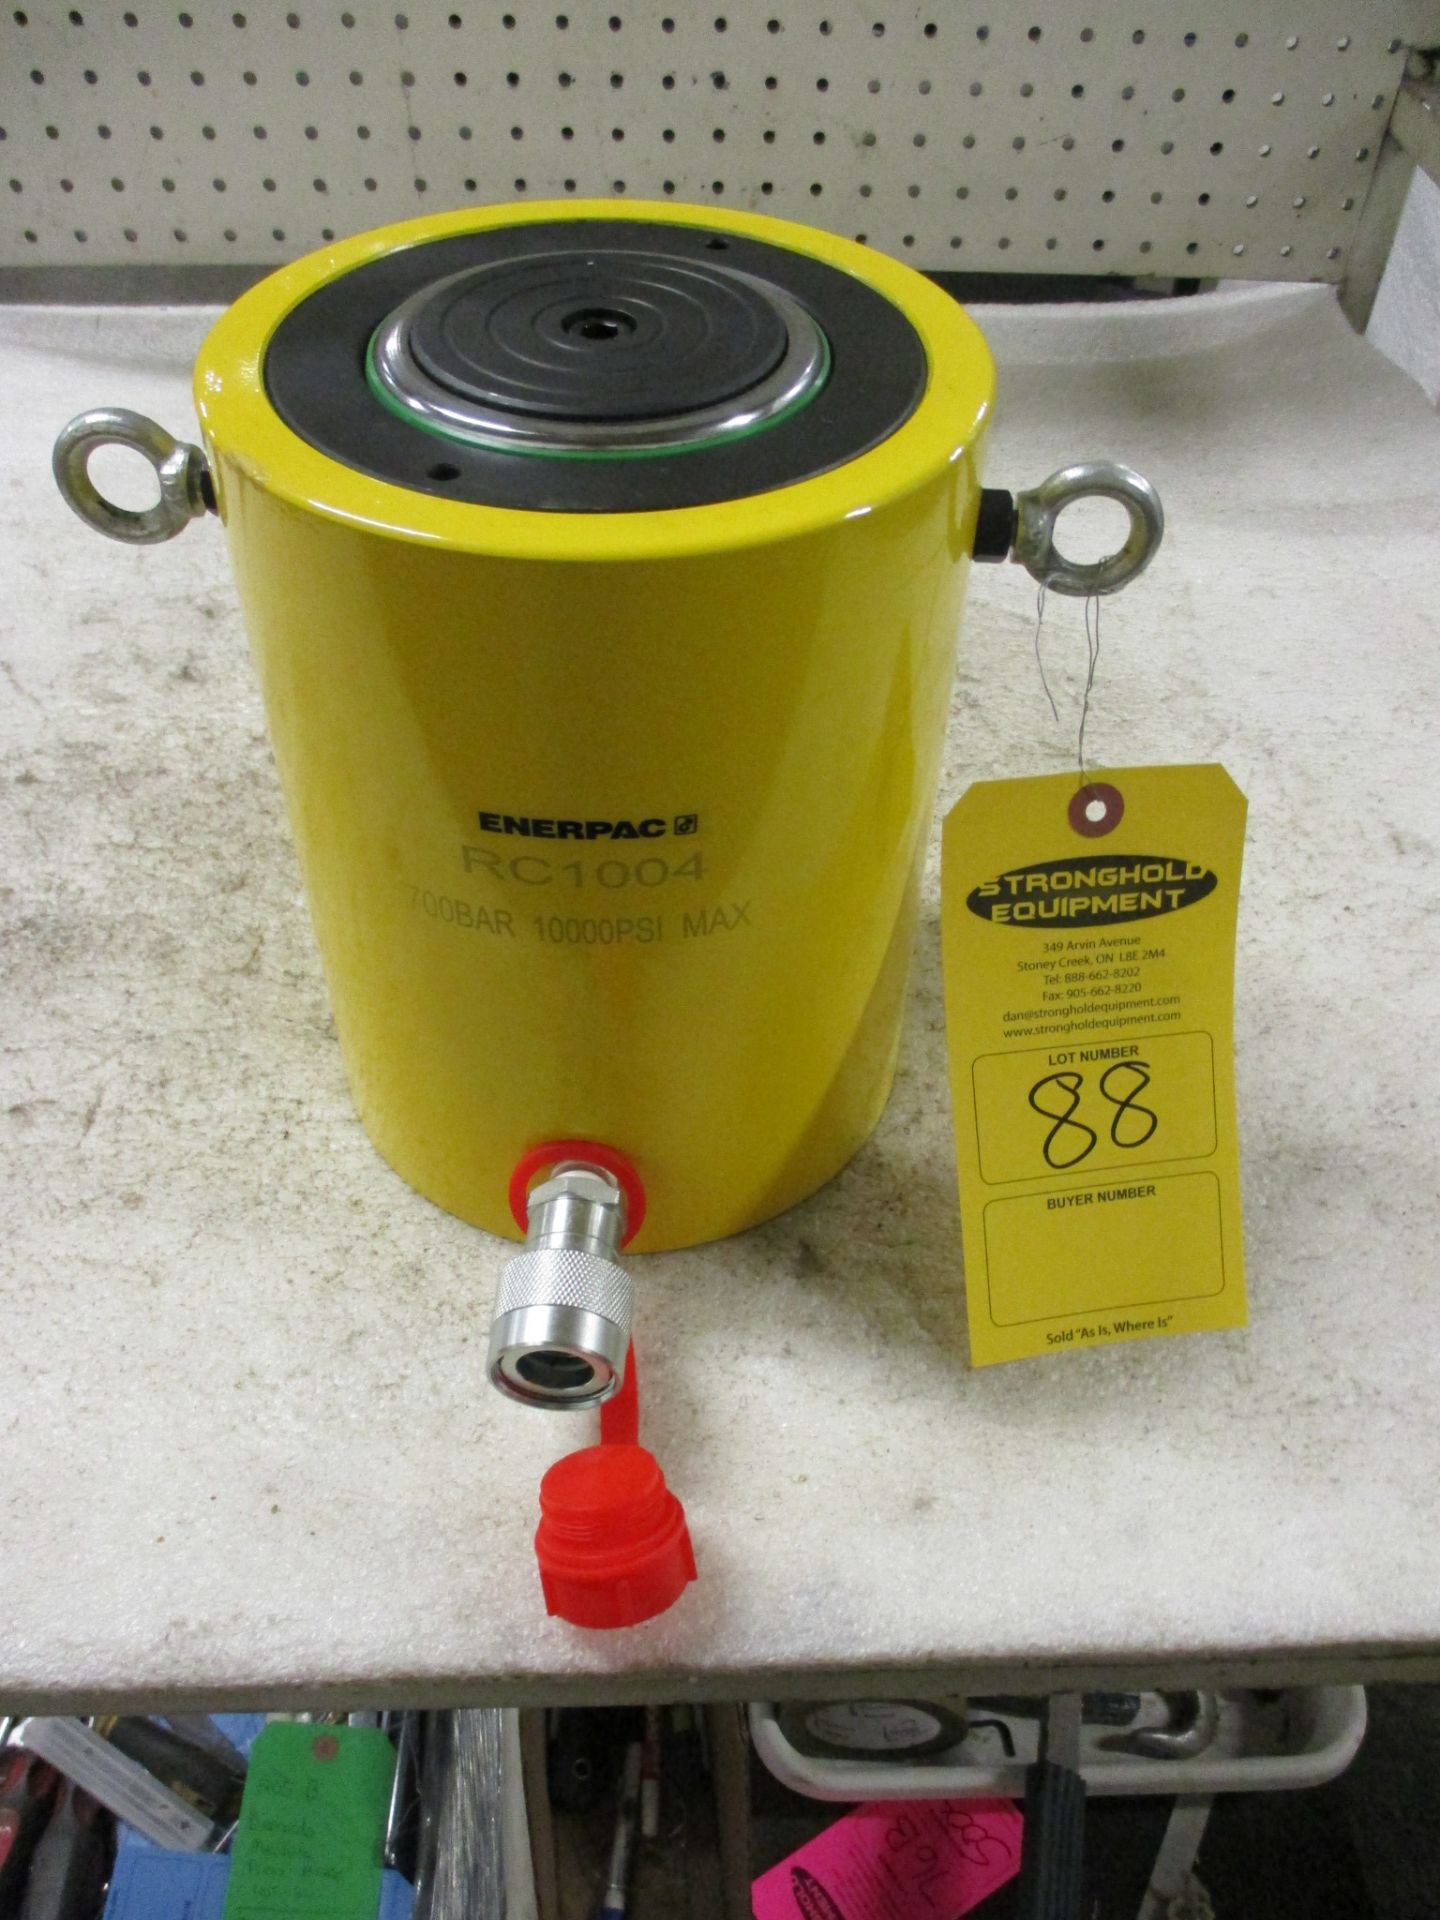 Enerpac RC-1004 MINT - 100 ton Hydraulic Jack with 4" stroke type cylinder